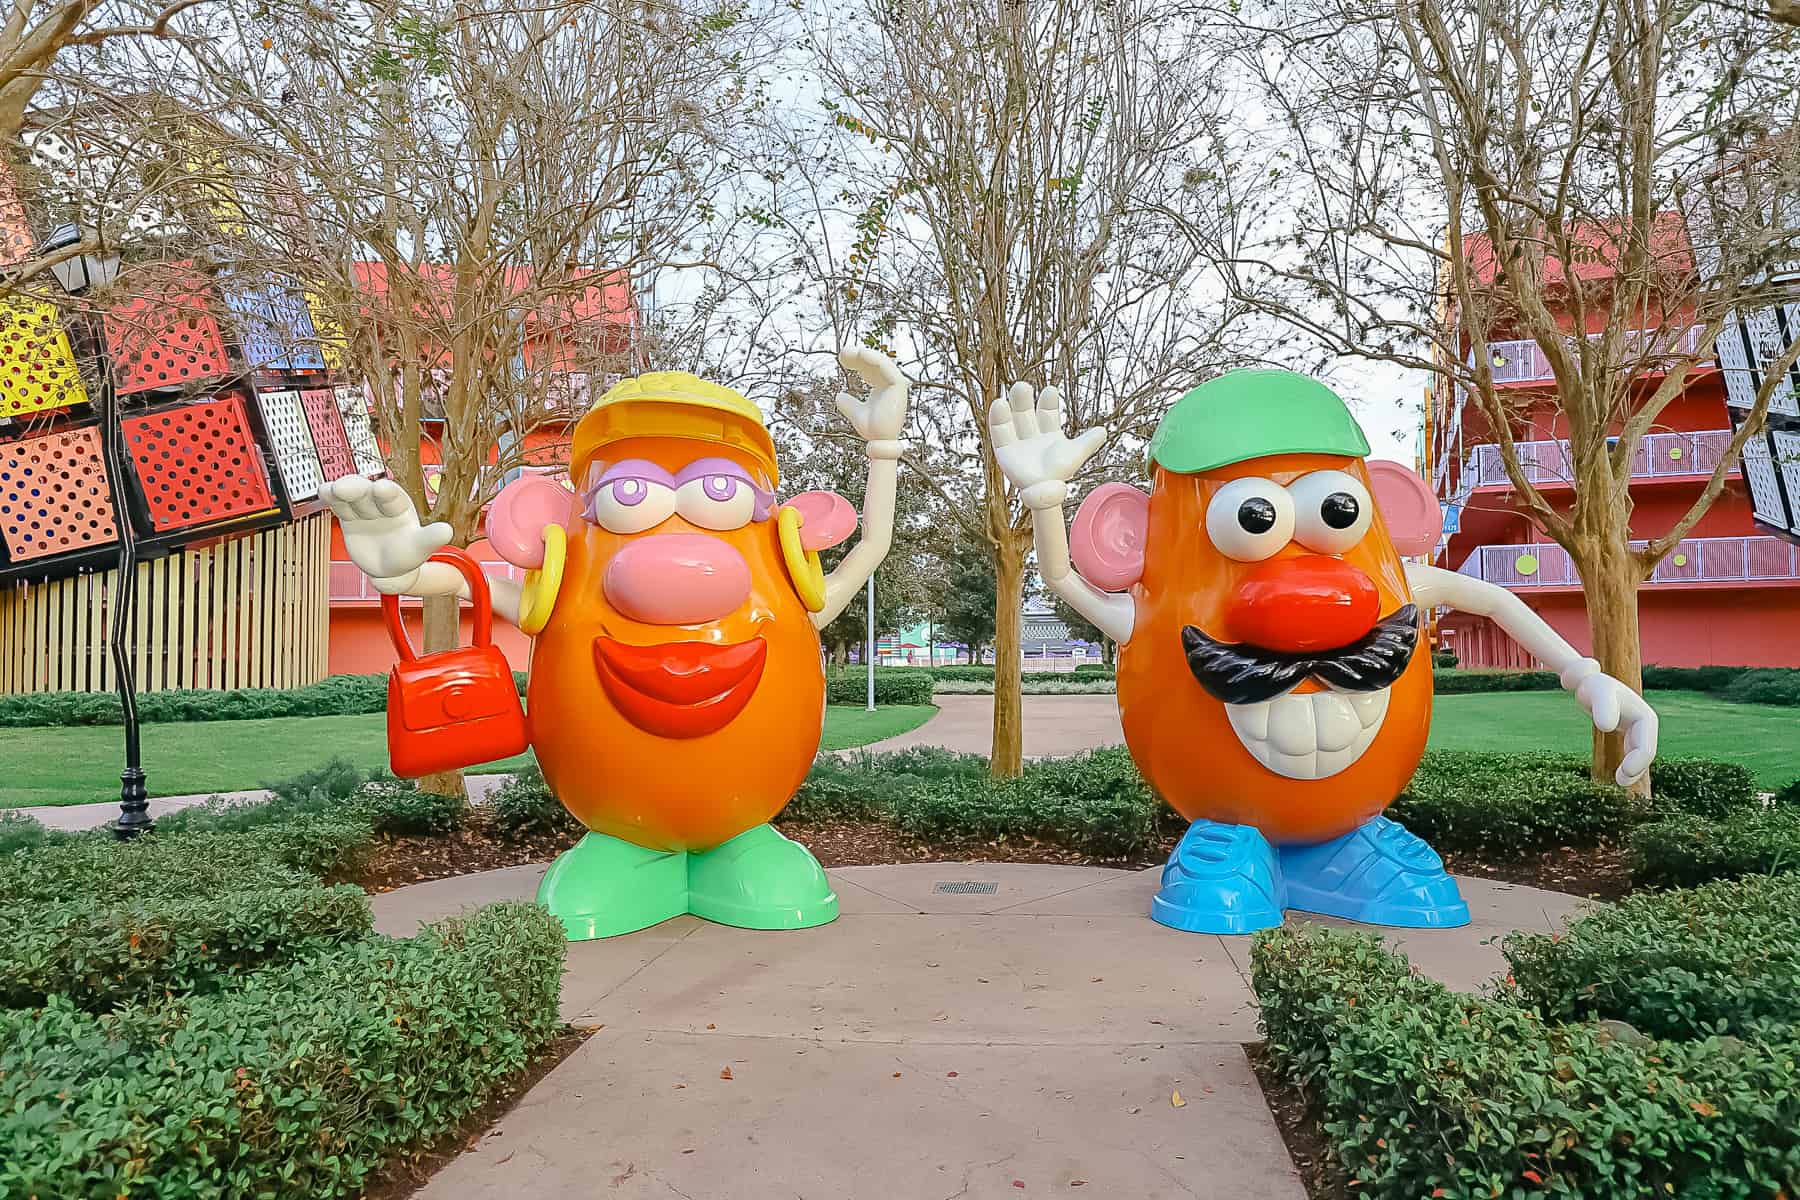 Mr. and Mrs. Potato Head welcome guests to the 90s 